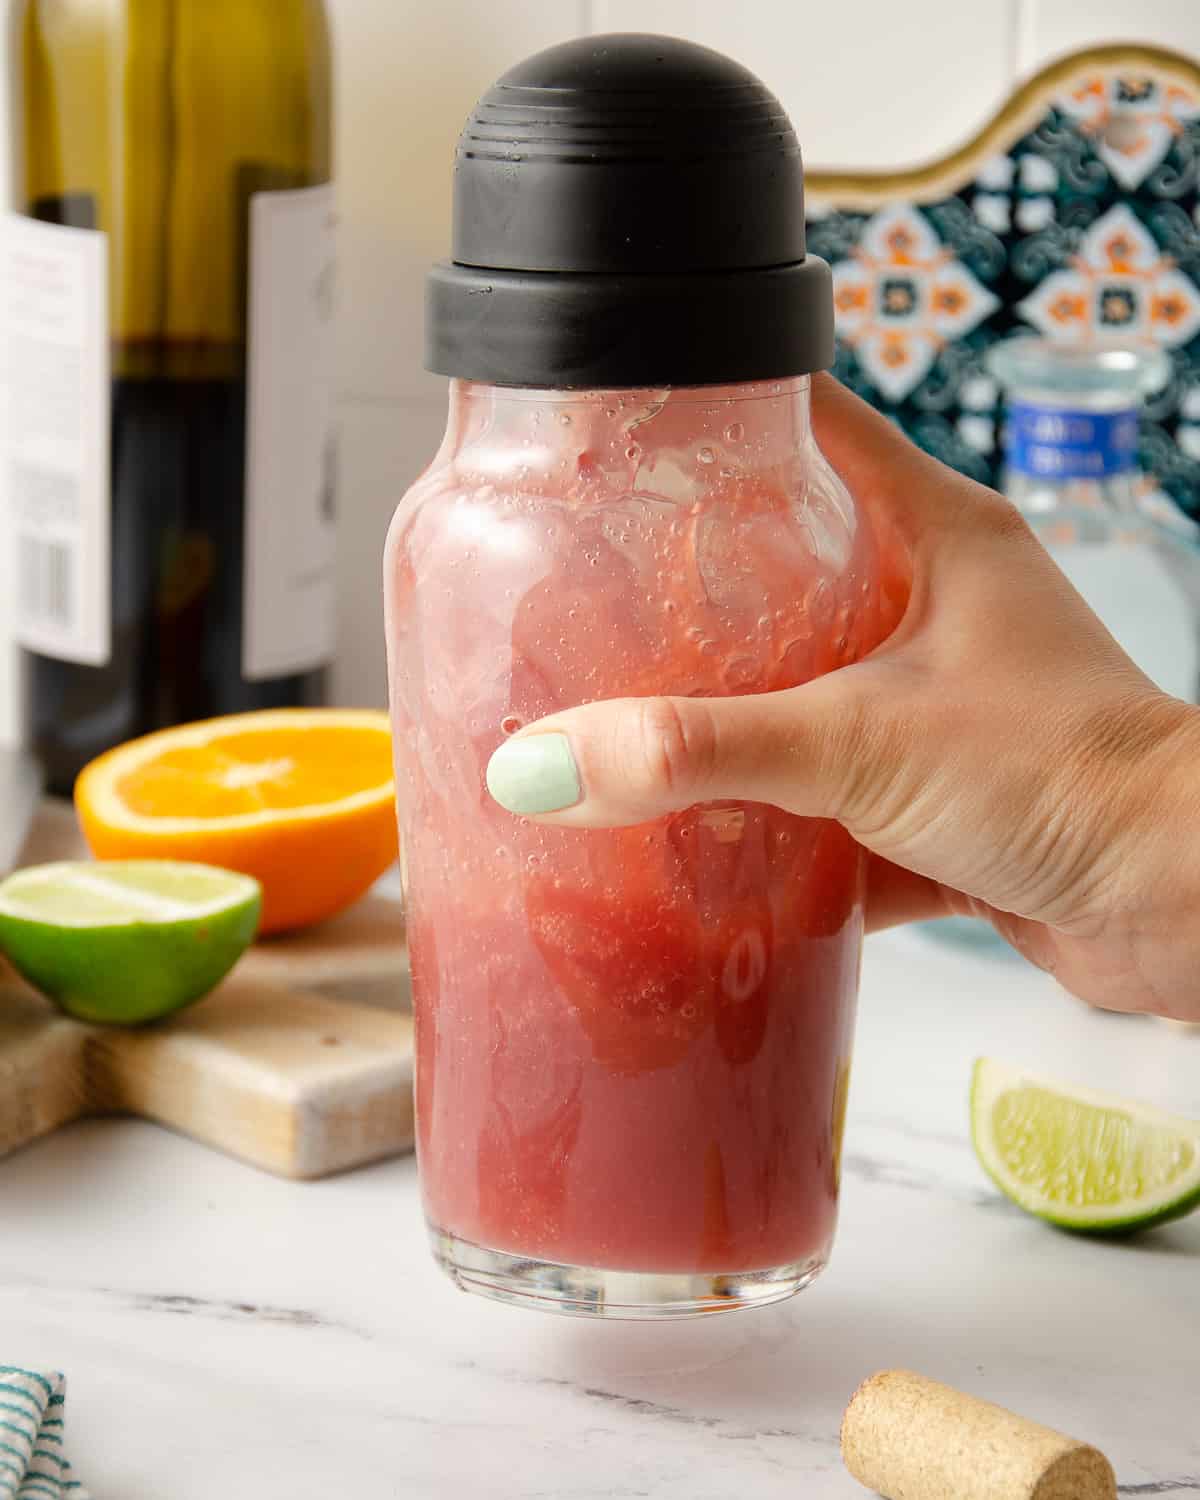 A hand shaking a cocktail shaker of red sangria margarita.